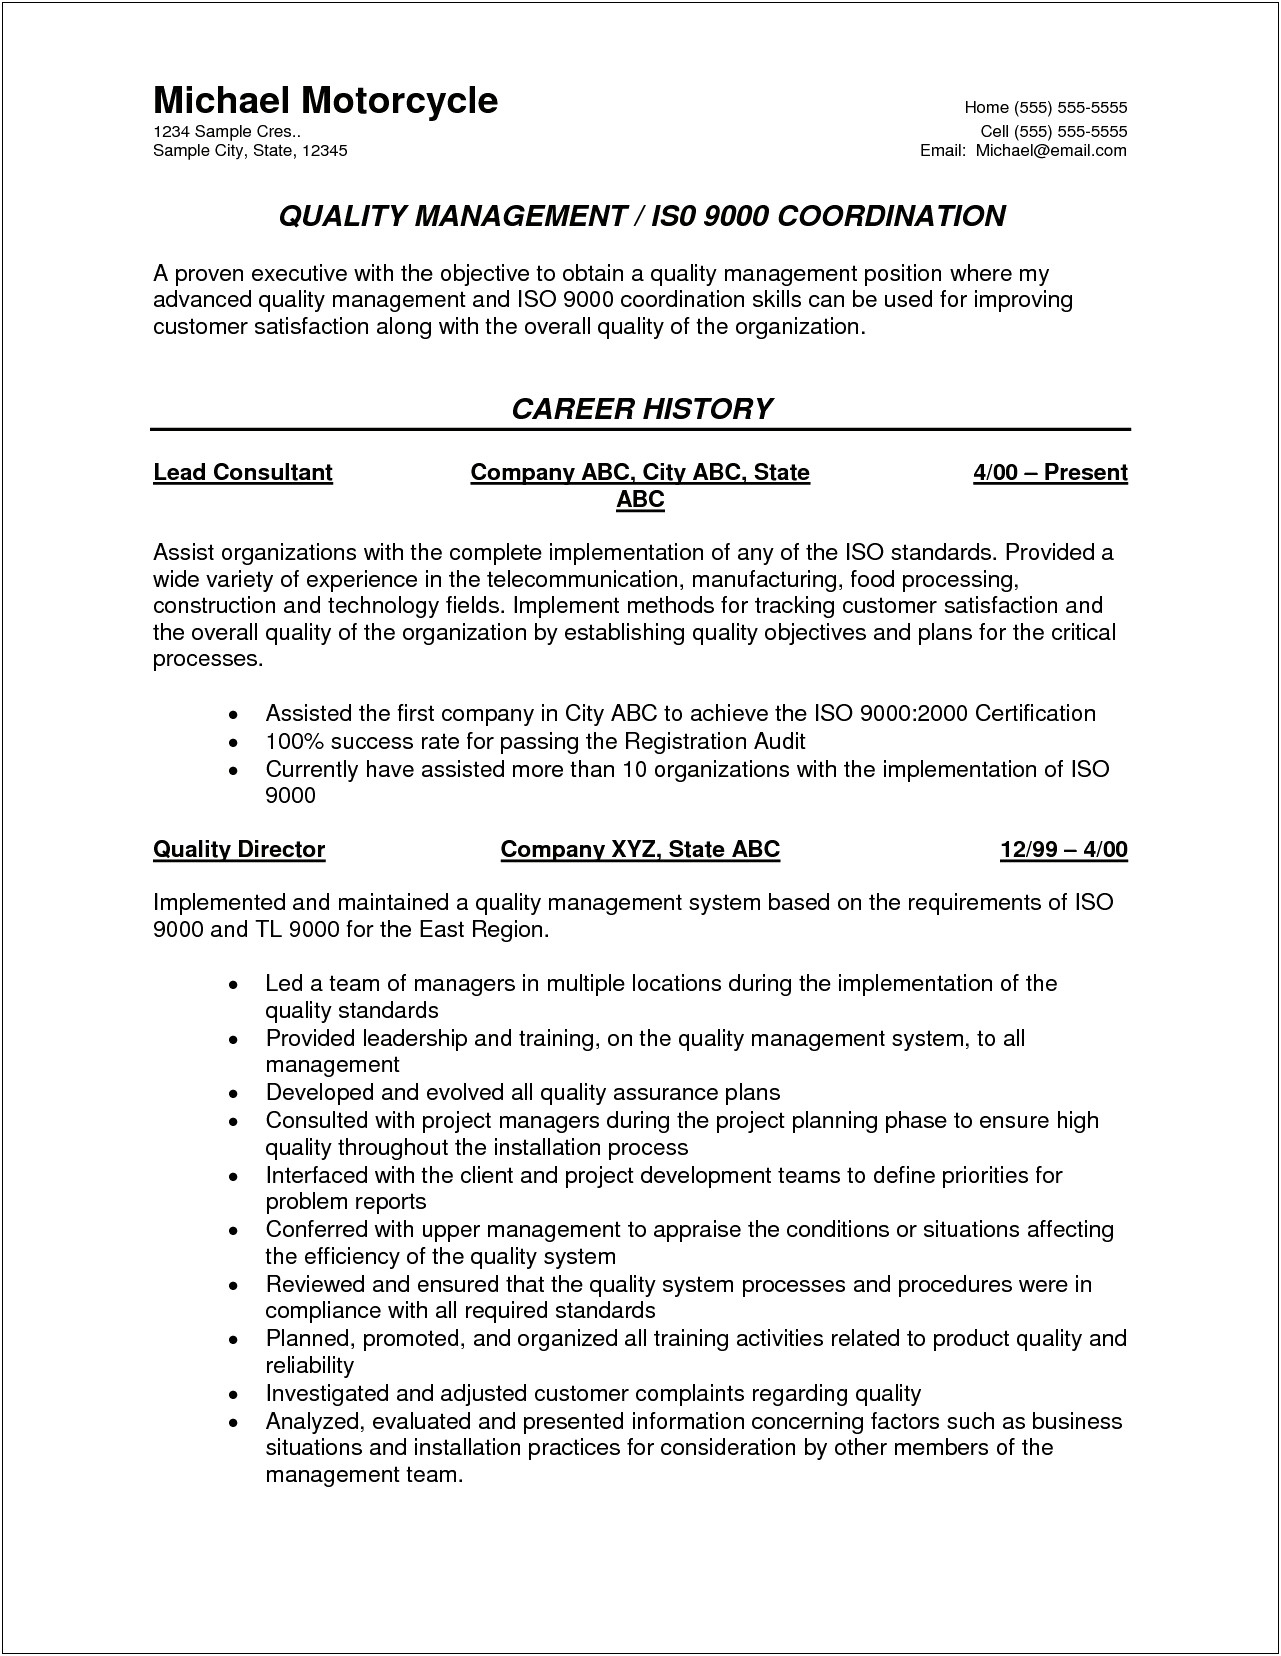 Resume Objective Statements For Quality Assurance